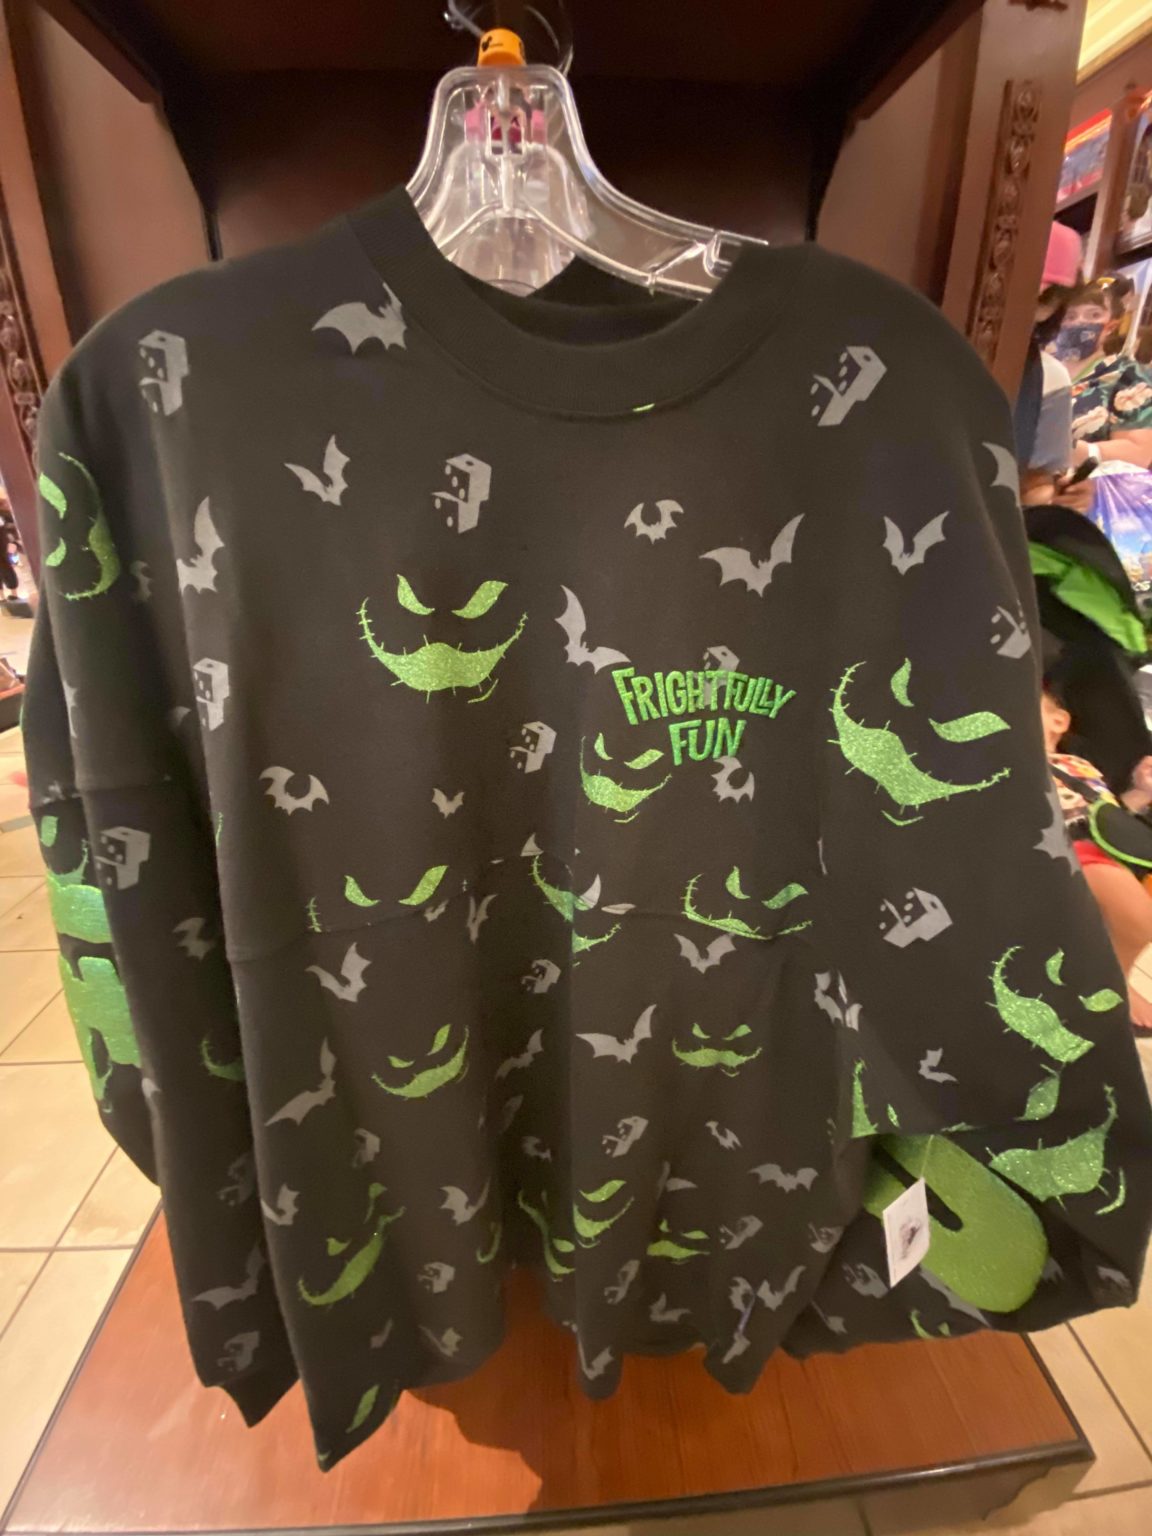 More Oogie Boogie Merch Spotted Today!